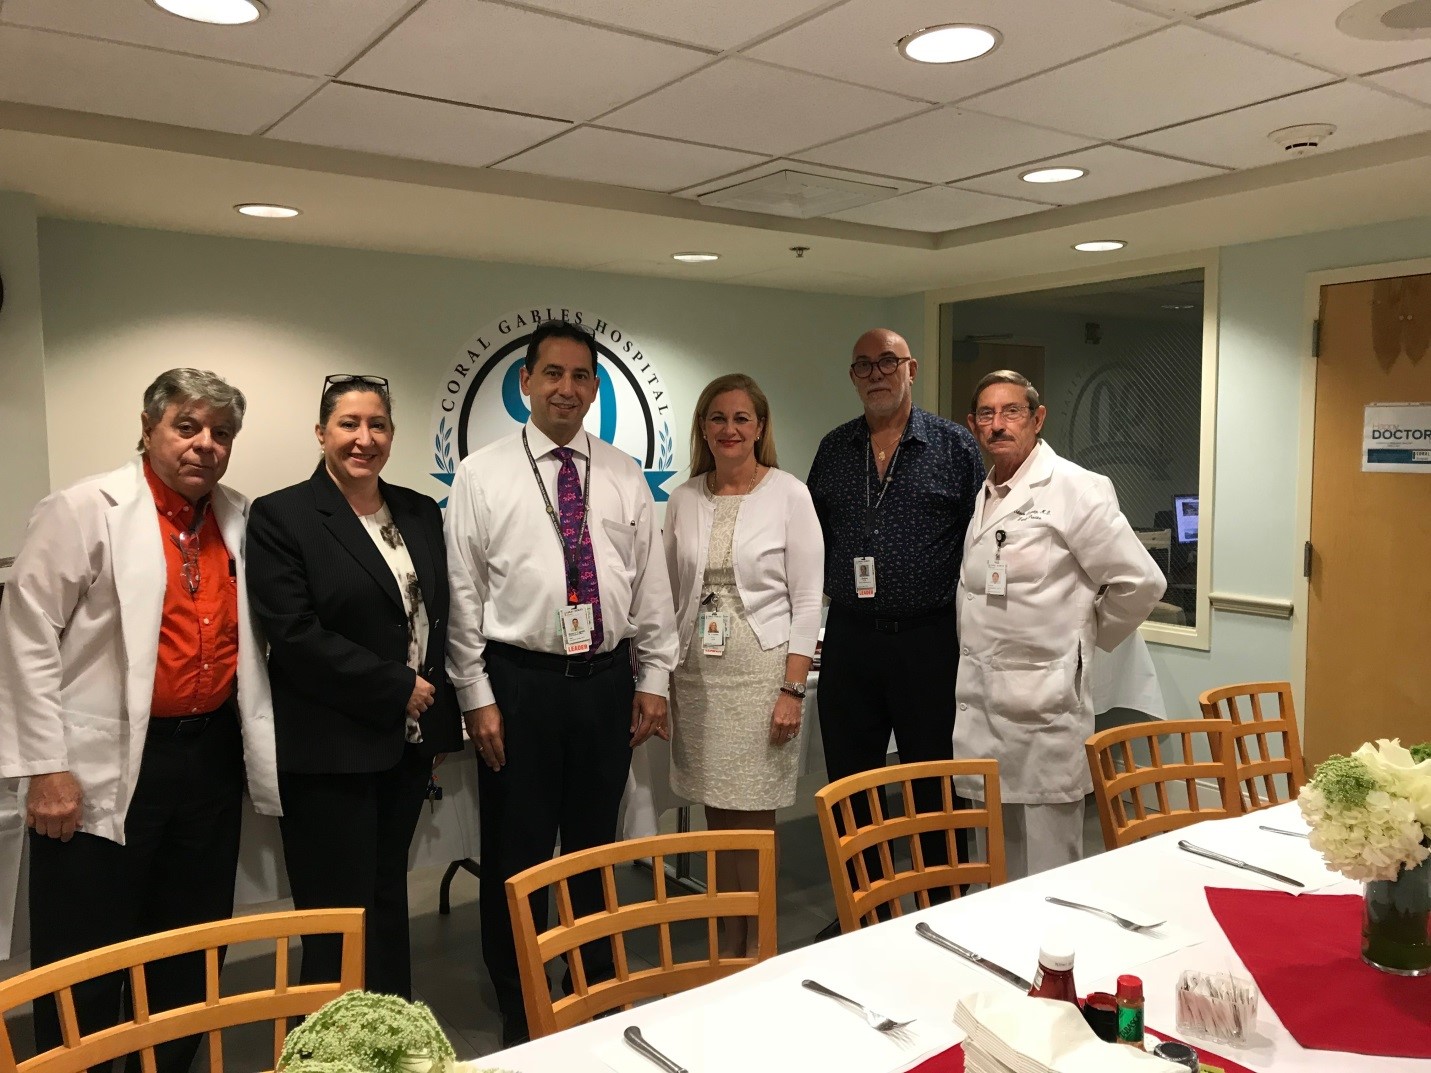 Coral Gables Hospital Celebrates Doctor’s Day